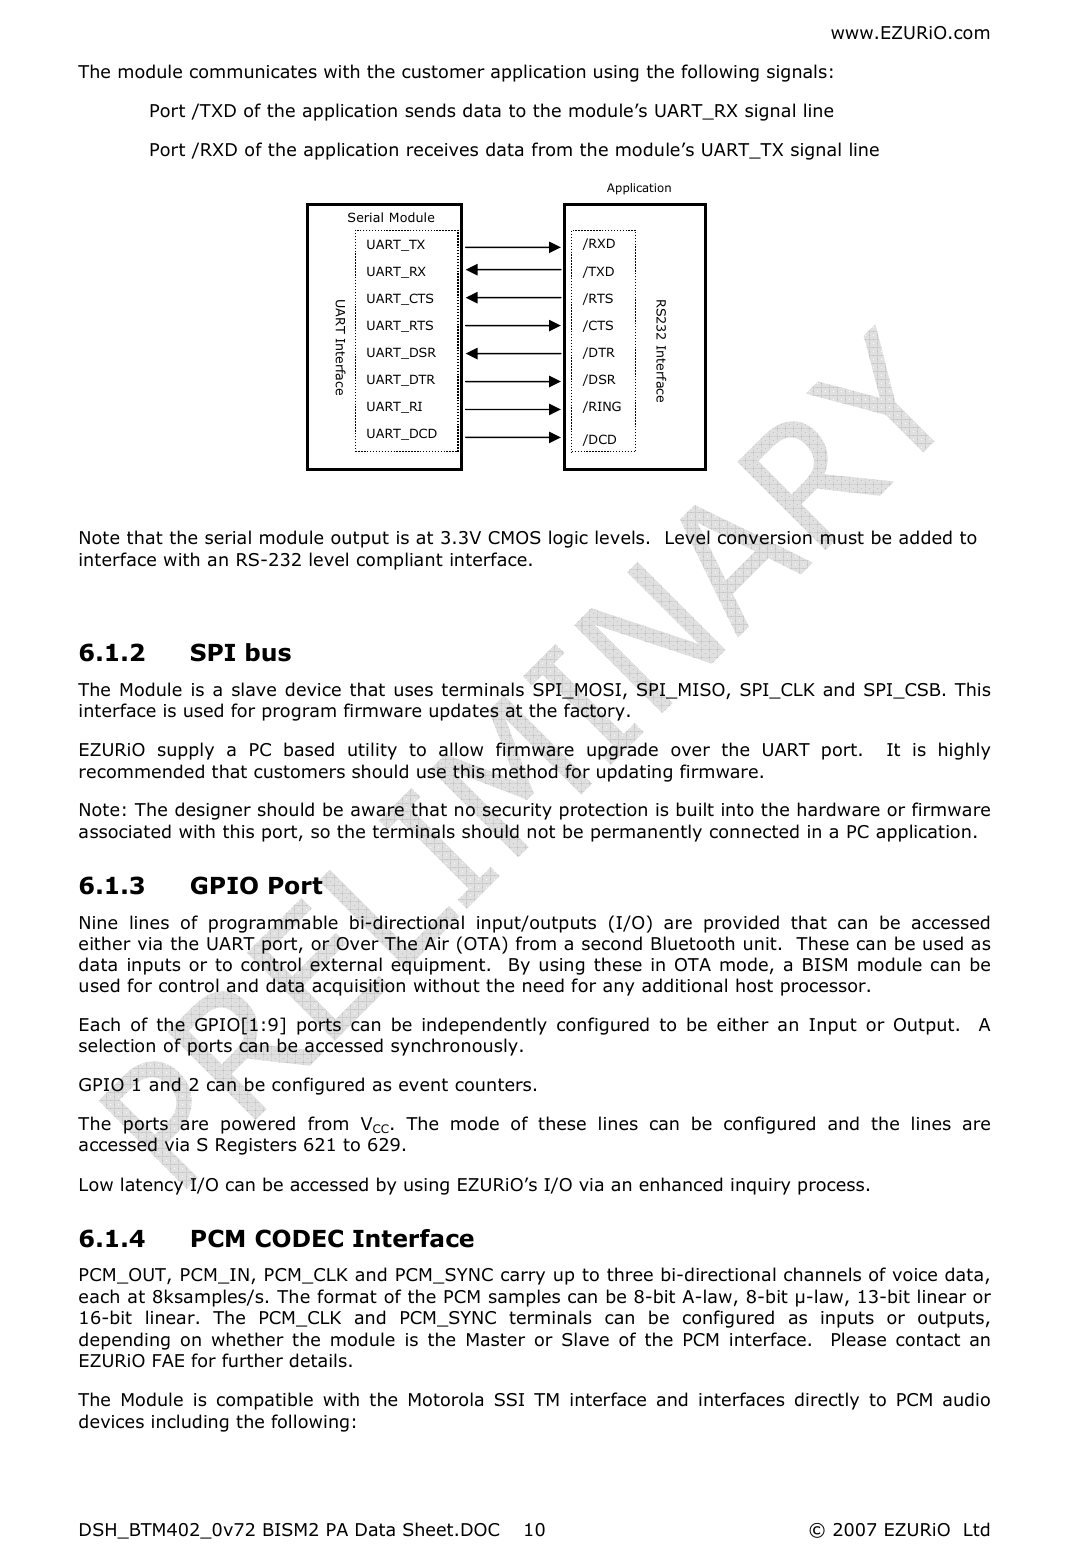 www.EZURiO.com DSH_BTM402_0v72 BISM2 PA Data Sheet.DOC  © 2007 EZURiO  Ltd  10Serial Module  UART Interface UART_TX UART_RX UART_CTS UART_RTS UART_DSR UART_DTR UART_RI UART_DCD /RXD /TXD /RTS /CTS /DTR /DSR /RING /DCD RS232 Interface The module communicates with the customer application using the following signals:  Port /TXD of the application sends data to the module’s UART_RX signal line  Port /RXD of the application receives data from the module’s UART_TX signal line           Note that the serial module output is at 3.3V CMOS logic levels.  Level conversion must be added to interface with an RS-232 level compliant interface.  6.1.2 SPI bus The Module is a slave device that  uses terminals SPI_MOSI, SPI_MISO, SPI_CLK and SPI_CSB. This interface is used for program firmware updates at the factory.  EZURiO  supply  a  PC  based  utility  to  allow  firmware  upgrade  over  the  UART  port.    It  is  highly recommended that customers should use this method for updating firmware. Note: The designer should be aware that no security protection is built into the hardware or firmware associated with this port, so the terminals should not be permanently connected in a PC application. 6.1.3 GPIO Port  Nine  lines  of  programmable  bi-directional  input/outputs  (I/O)  are  provided  that  can  be  accessed either via the UART port, or Over The Air (OTA) from a second Bluetooth unit.  These can be used as data inputs or to control external equipment.  By using these in OTA mode, a BISM  module can be used for control and data acquisition without the need for any additional host processor. Each  of  the  GPIO[1:9]  ports  can  be  independently  configured  to  be  either  an  Input  or  Output.    A selection of ports can be accessed synchronously. GPIO 1 and 2 can be configured as event counters. The  ports  are  powered  from  VCC.  The  mode  of  these  lines  can  be  configured  and  the  lines  are accessed via S Registers 621 to 629. Low latency I/O can be accessed by using EZURiO’s I/O via an enhanced inquiry process. 6.1.4 PCM CODEC Interface PCM_OUT, PCM_IN, PCM_CLK and PCM_SYNC carry up to three bi-directional channels of voice data, each at 8ksamples/s. The format of the PCM samples can be 8-bit A-law, 8-bit µ-law, 13-bit linear or 16-bit  linear.  The  PCM_CLK  and  PCM_SYNC  terminals  can  be  configured  as  inputs  or  outputs, depending  on  whether  the  module  is  the  Master  or  Slave  of  the  PCM  interface.    Please  contact  an EZURiO FAE for further details. The  Module  is  compatible  with  the  Motorola  SSI  TM  interface  and  interfaces  directly  to  PCM  audio devices including the following:  Application 